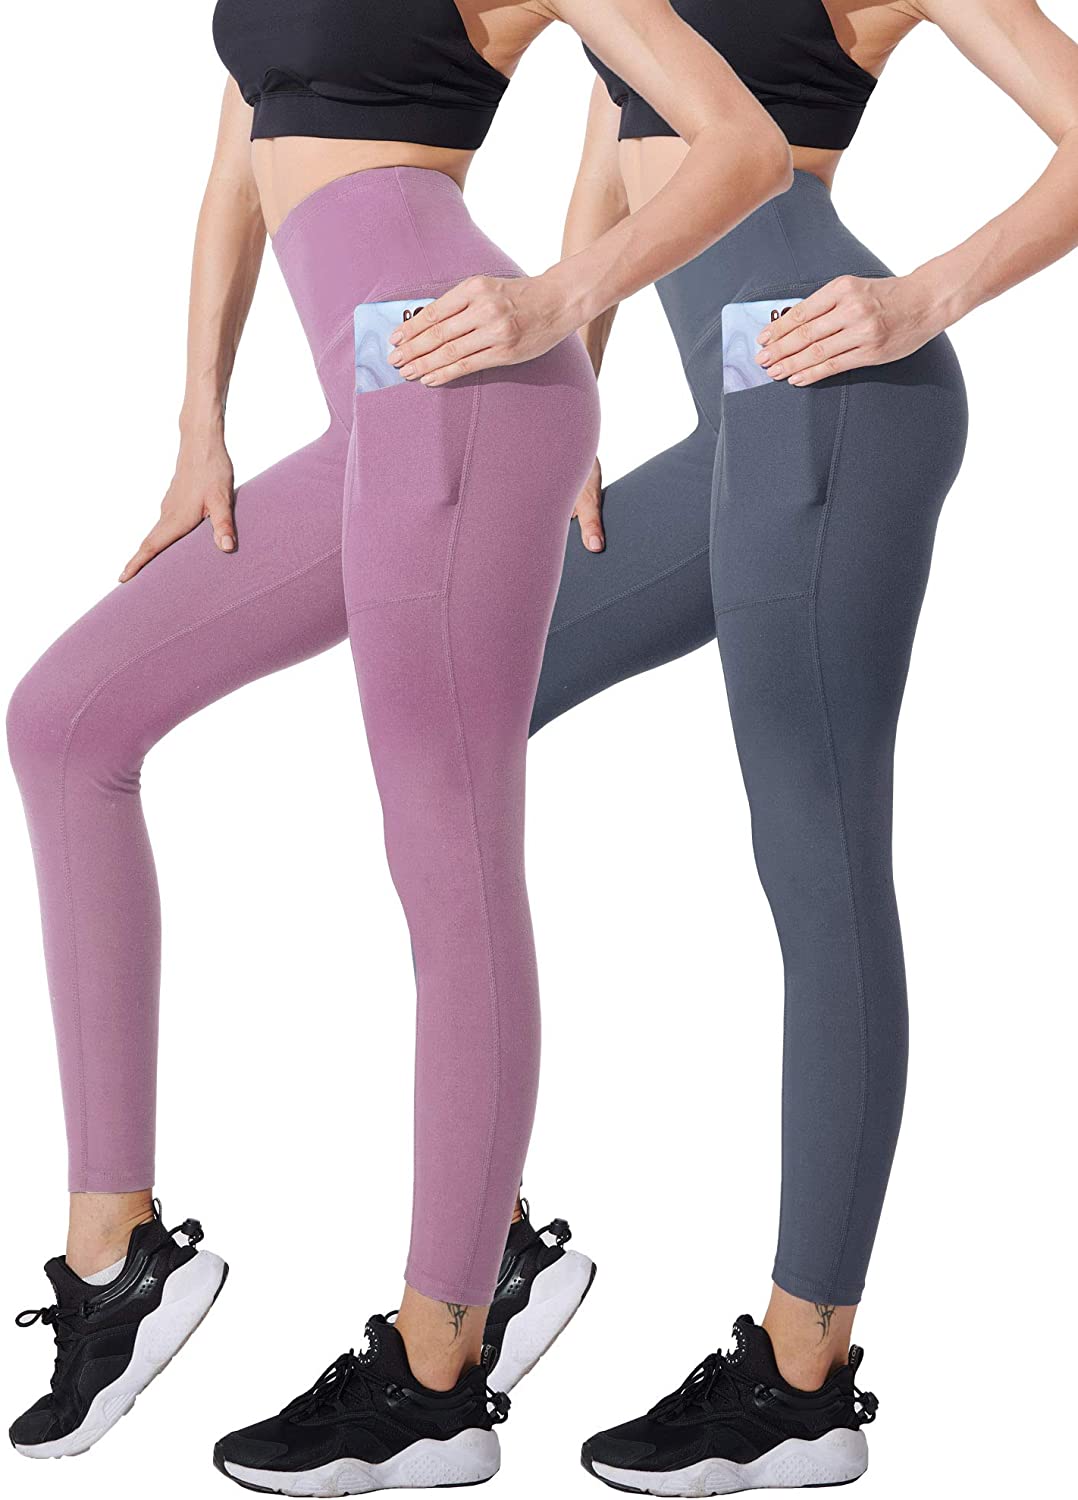 CADMUS High Waisted Workout Leggings for Women Tummy Control Yoga Pants with Pockets,2 or 3 Pack 